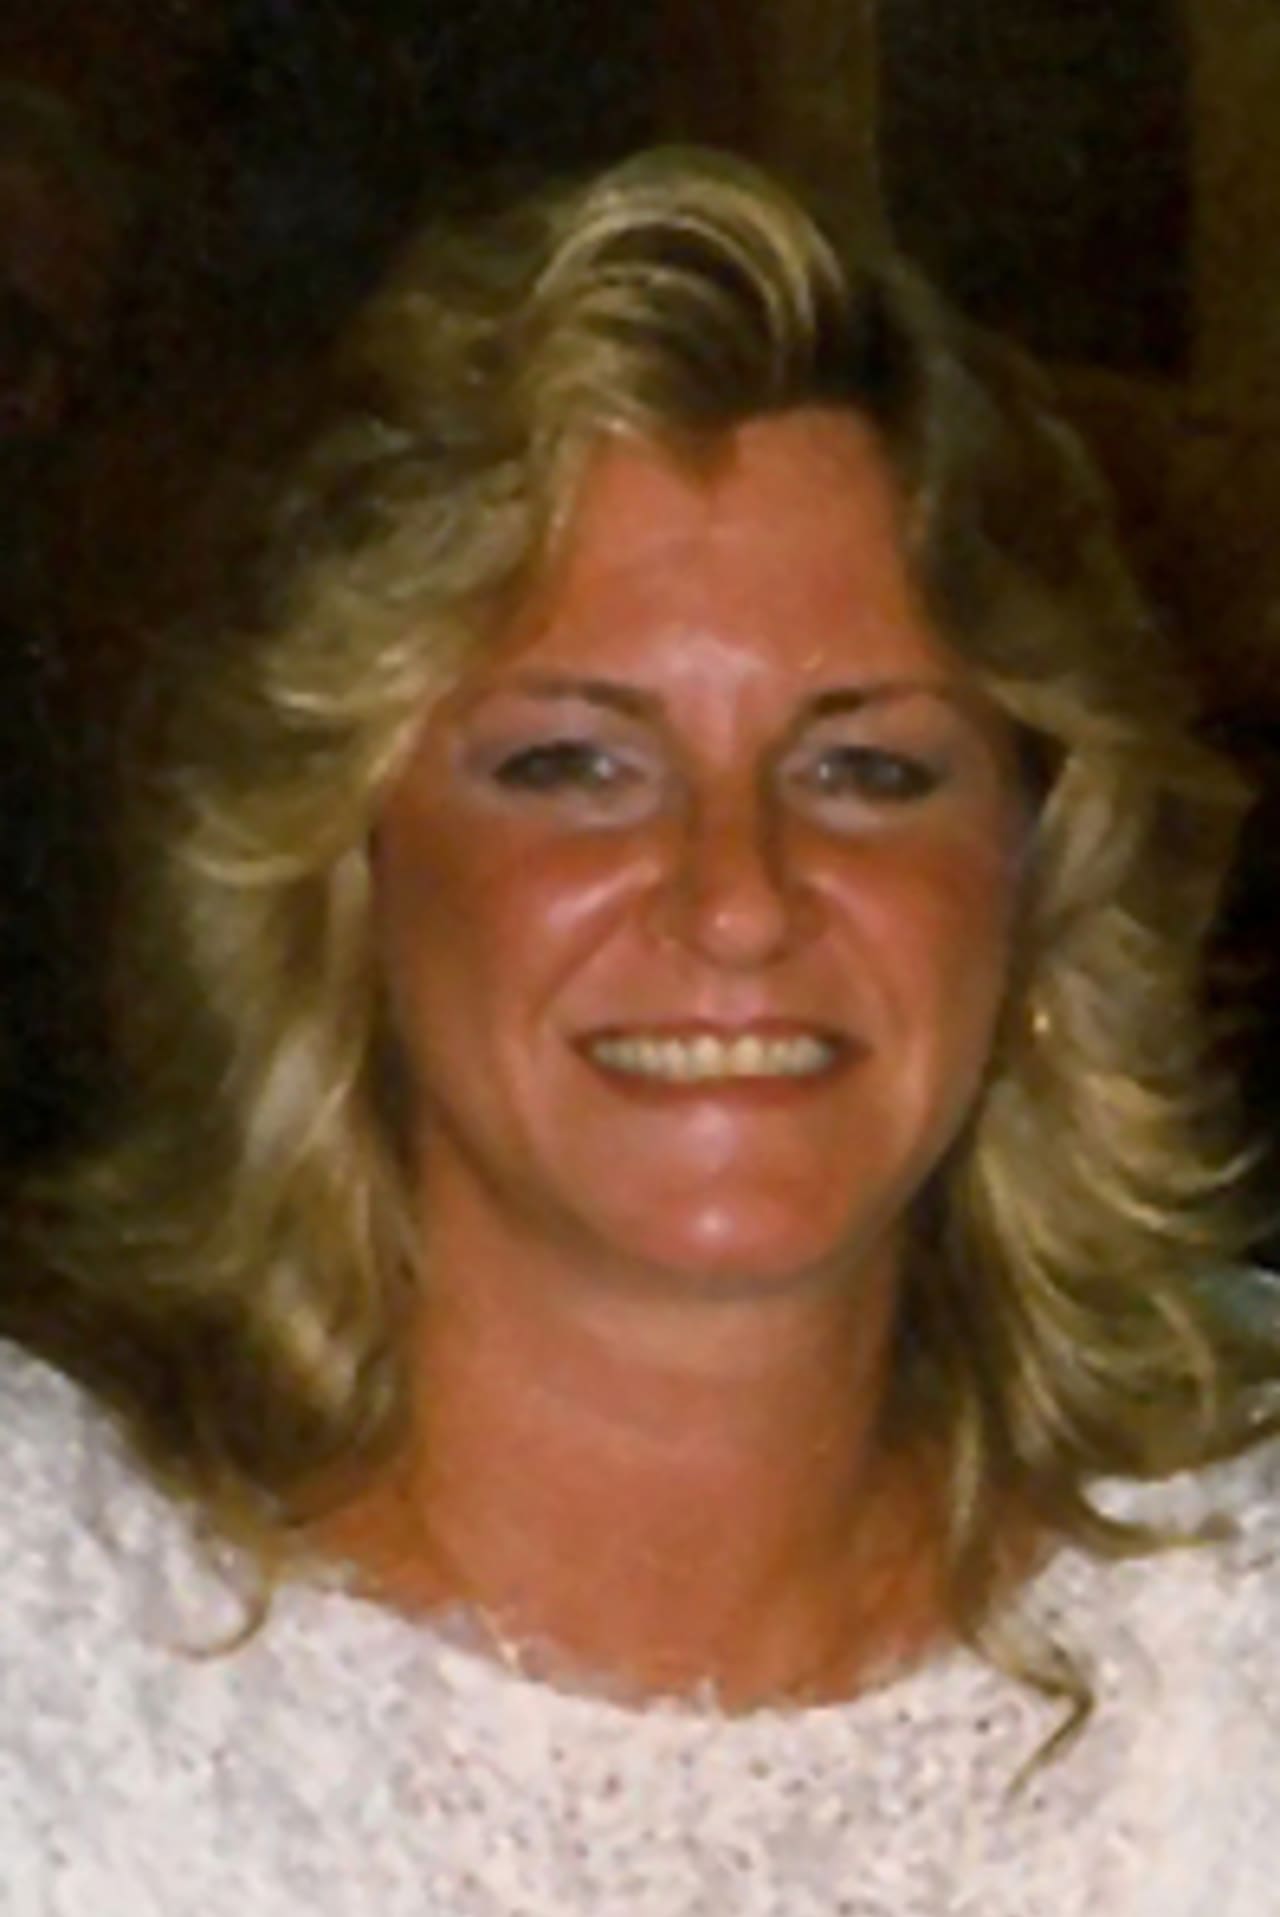 Services will be held Saturday for Arlene Brubacher of Harrison, who died in a fire early Tuesday morning.